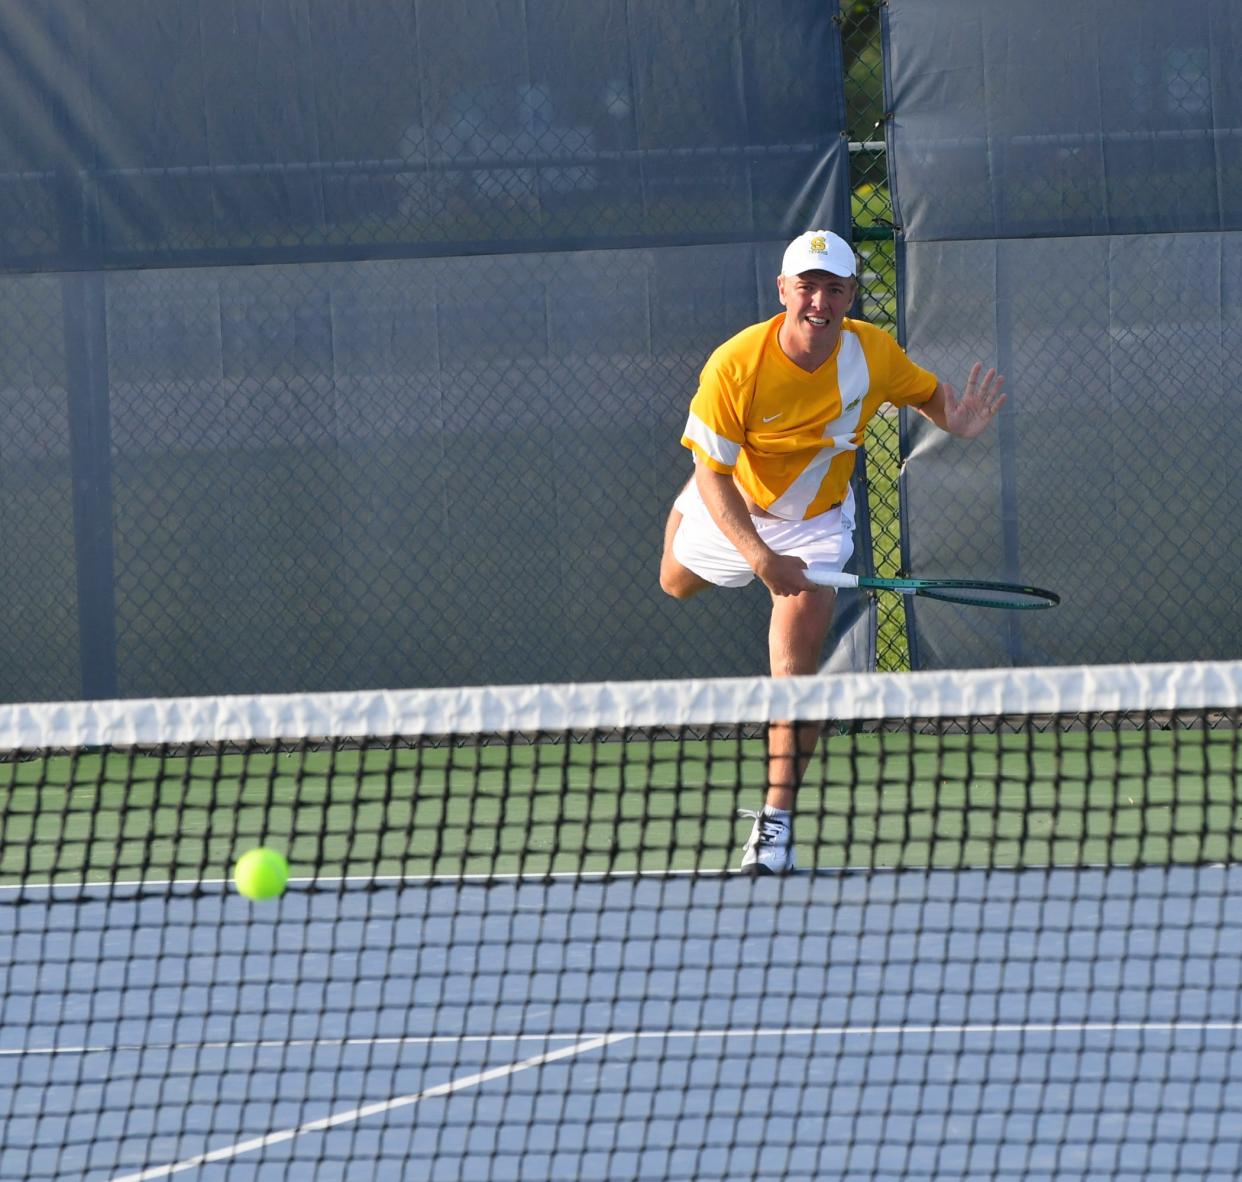 Count an ace serve for Sycamore's Nick Meyers in the first singles at Flight A of the GCTCA Coaches Classic Tennis Tournament, Mason High School, April 27.